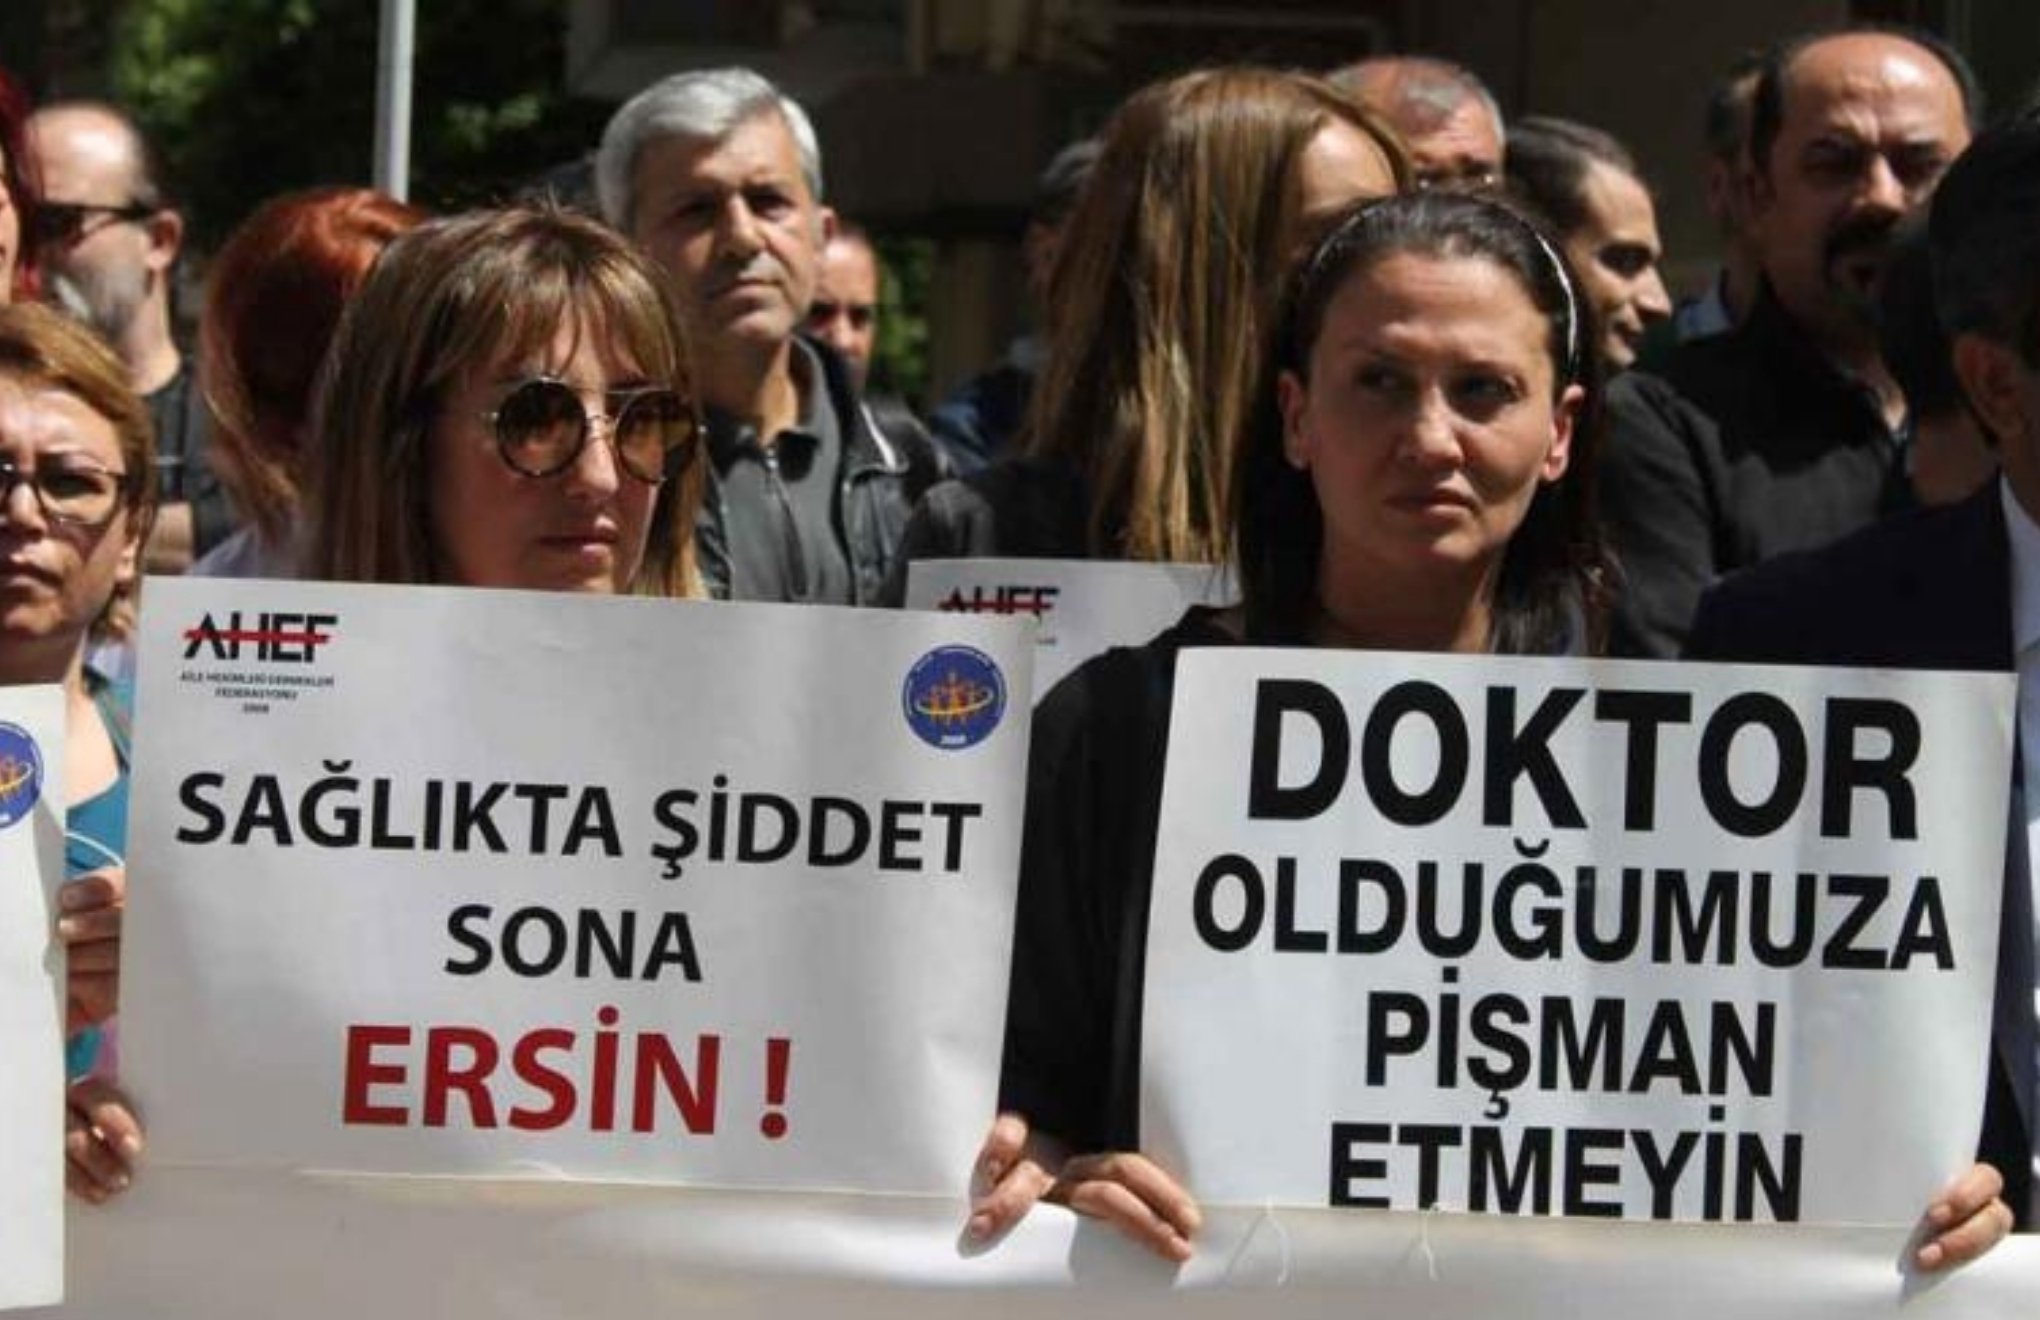 ‘19 healthcare workers subjected to violence in Turkey in October'